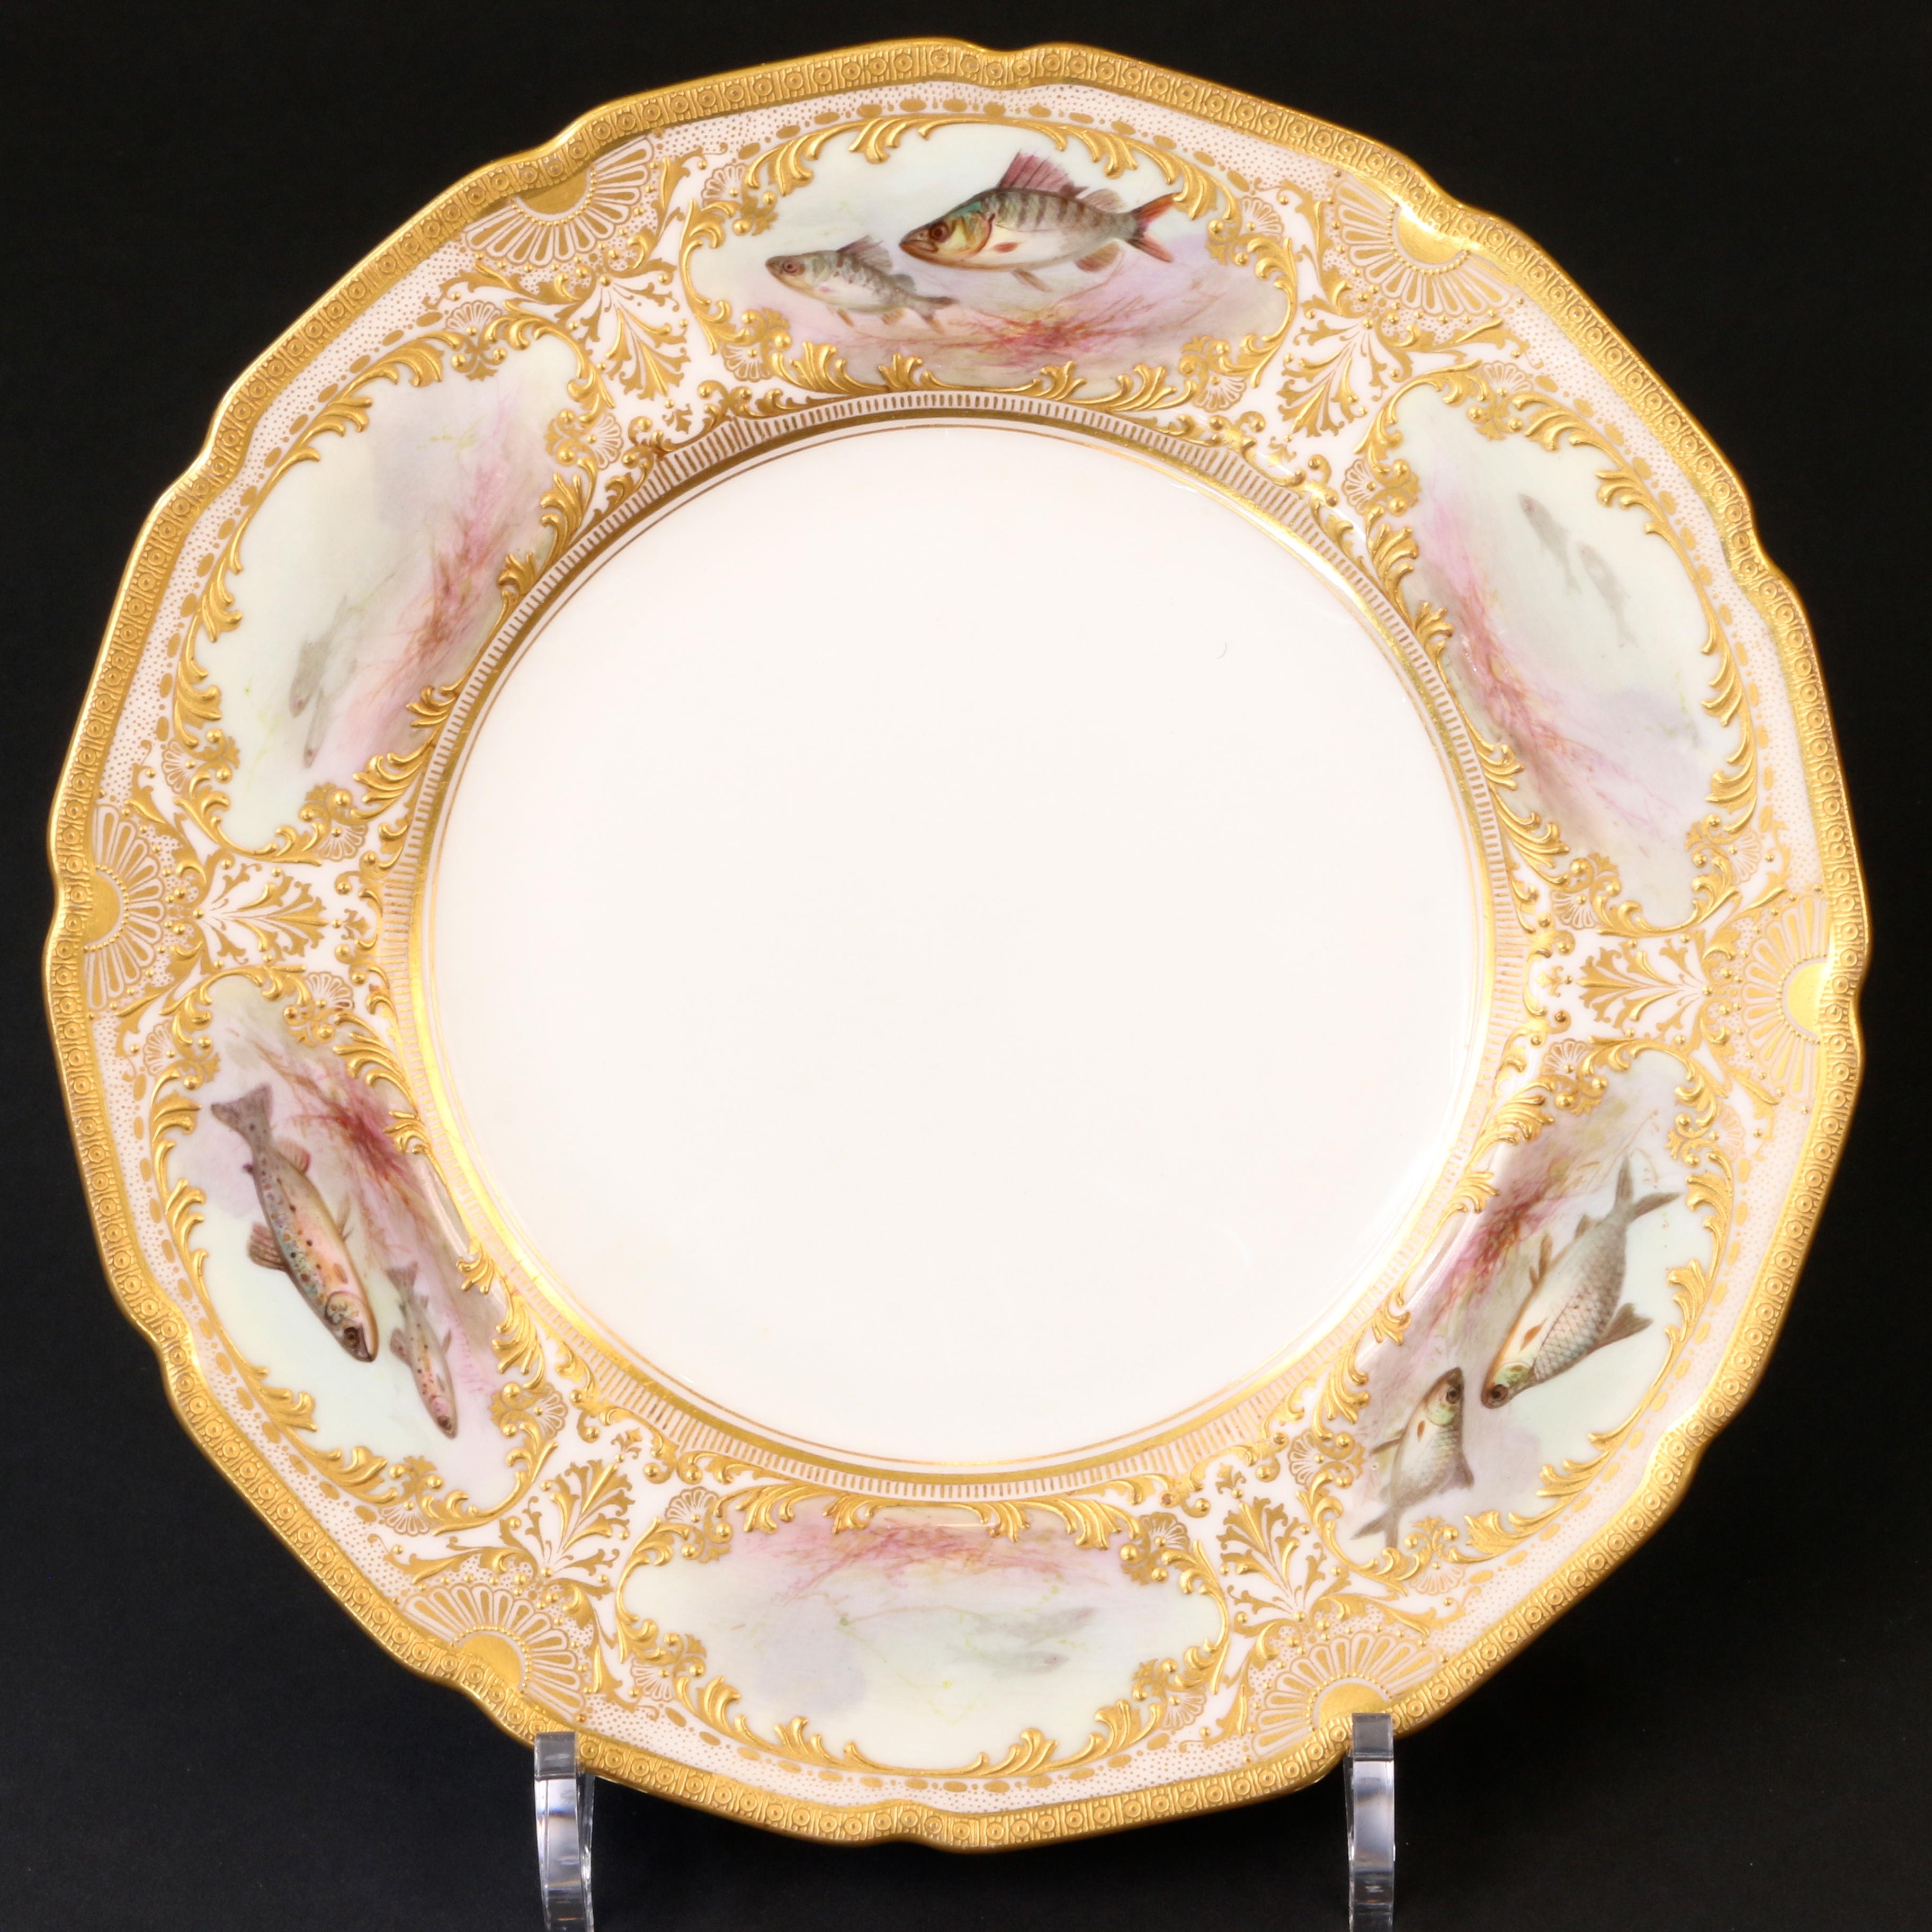 12 Royal Doulton Hand Painted and Heavily Gilded Fish Plates For Sale 4